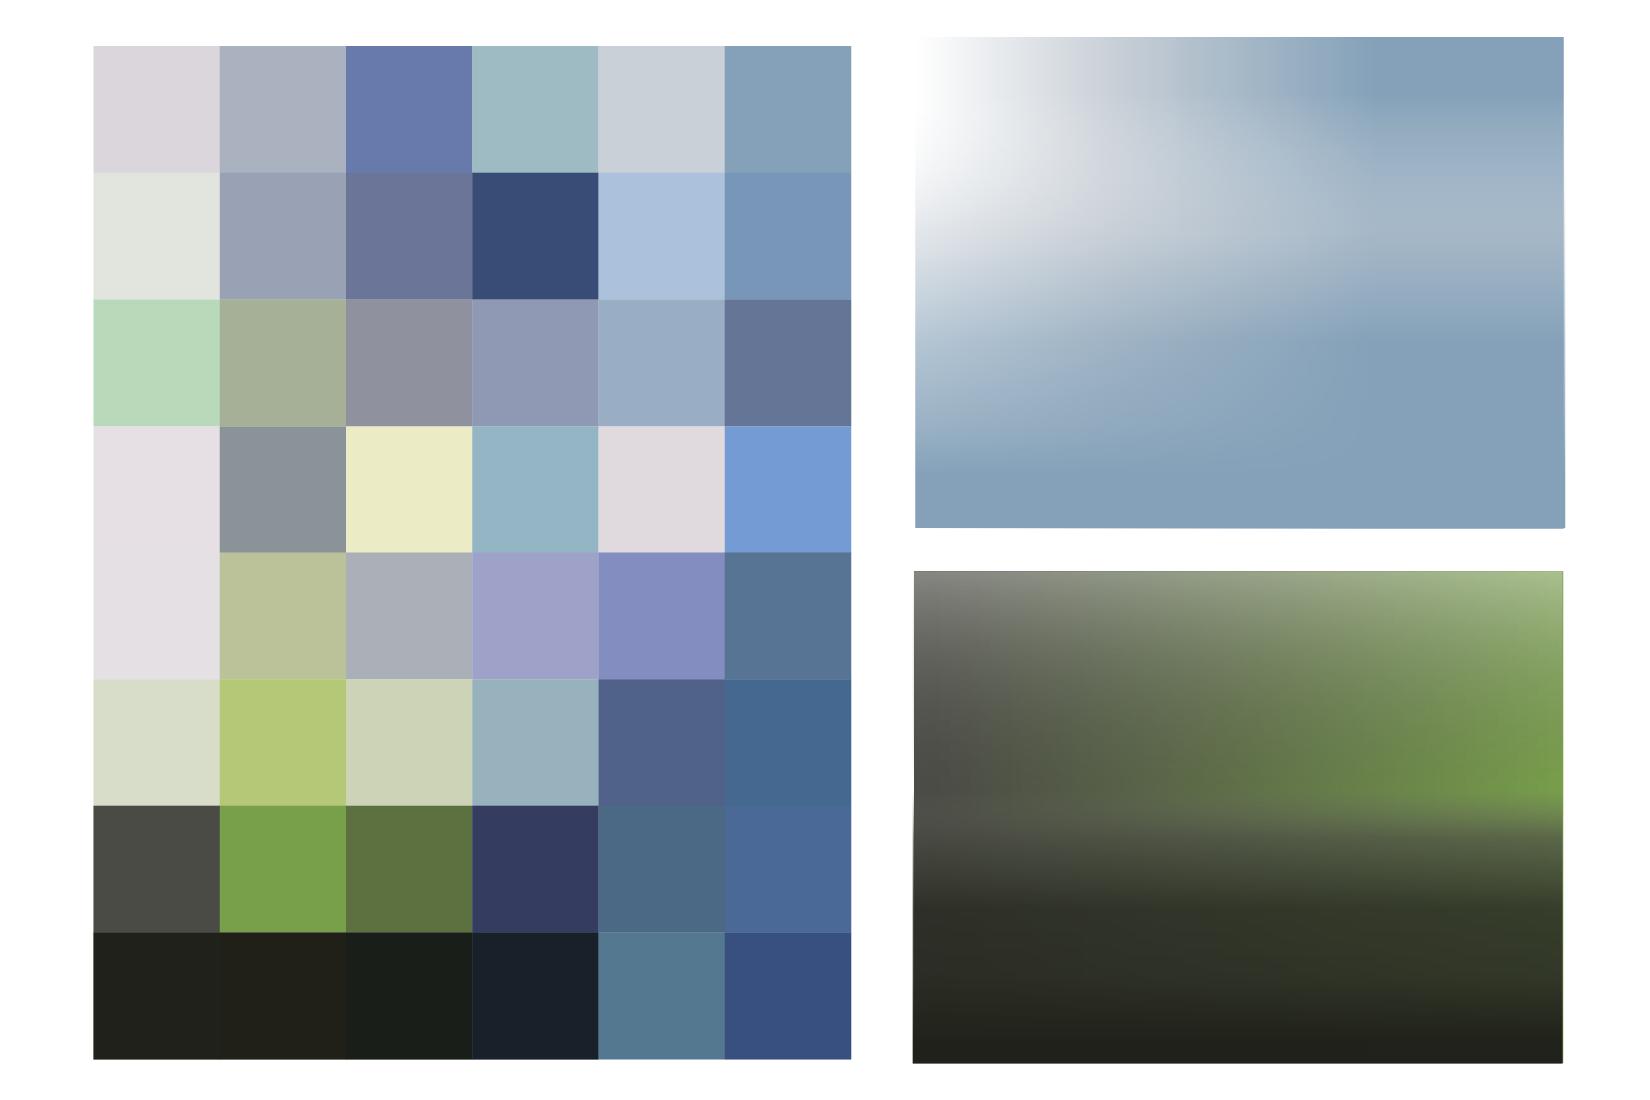 Colour fields developed from grids